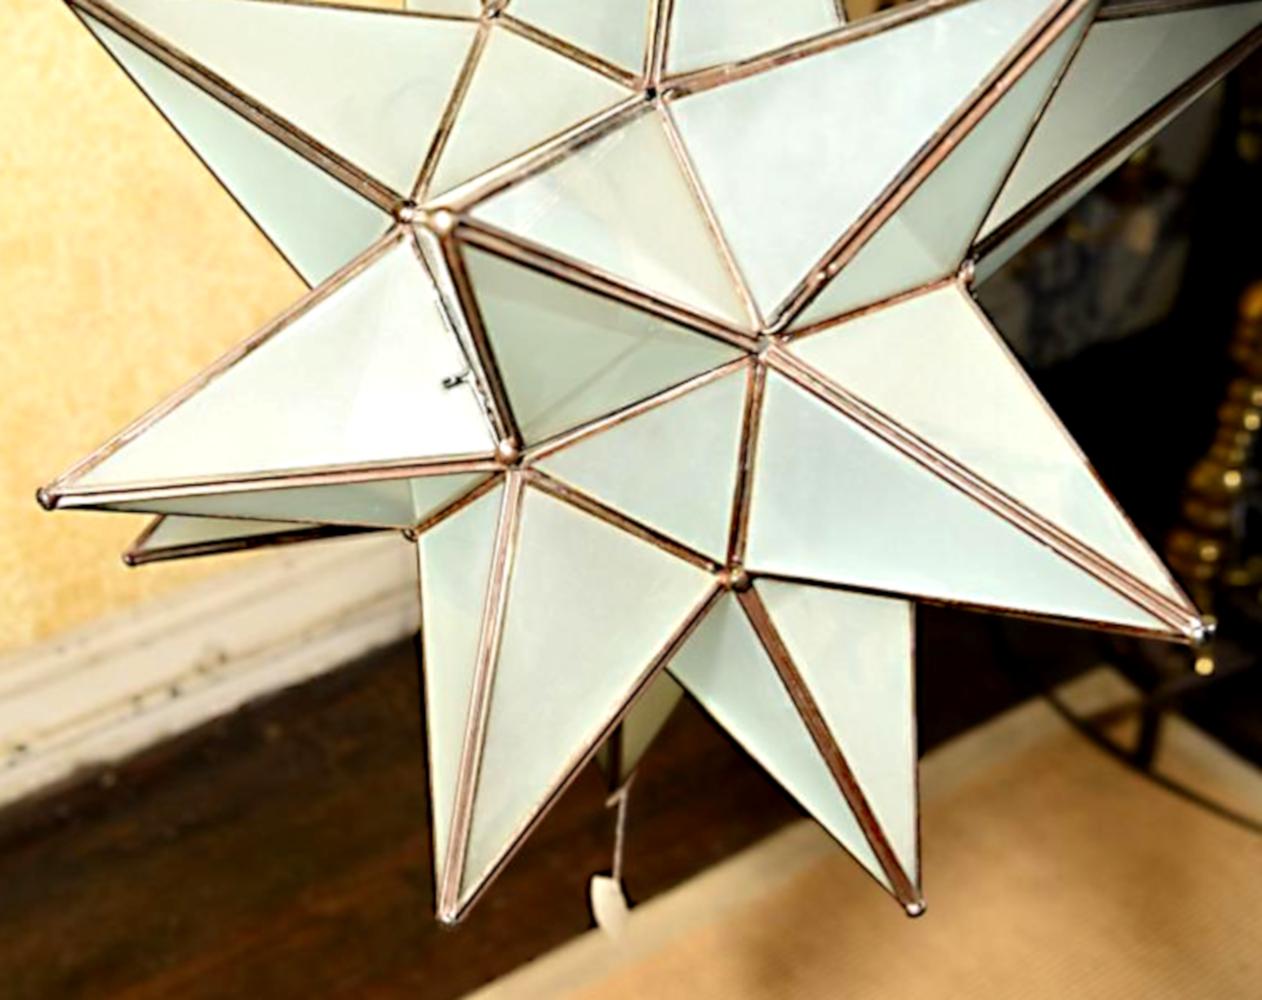 A very large and beautiful, handmade and electrified, frosted glass Moravian star lighting fixture.